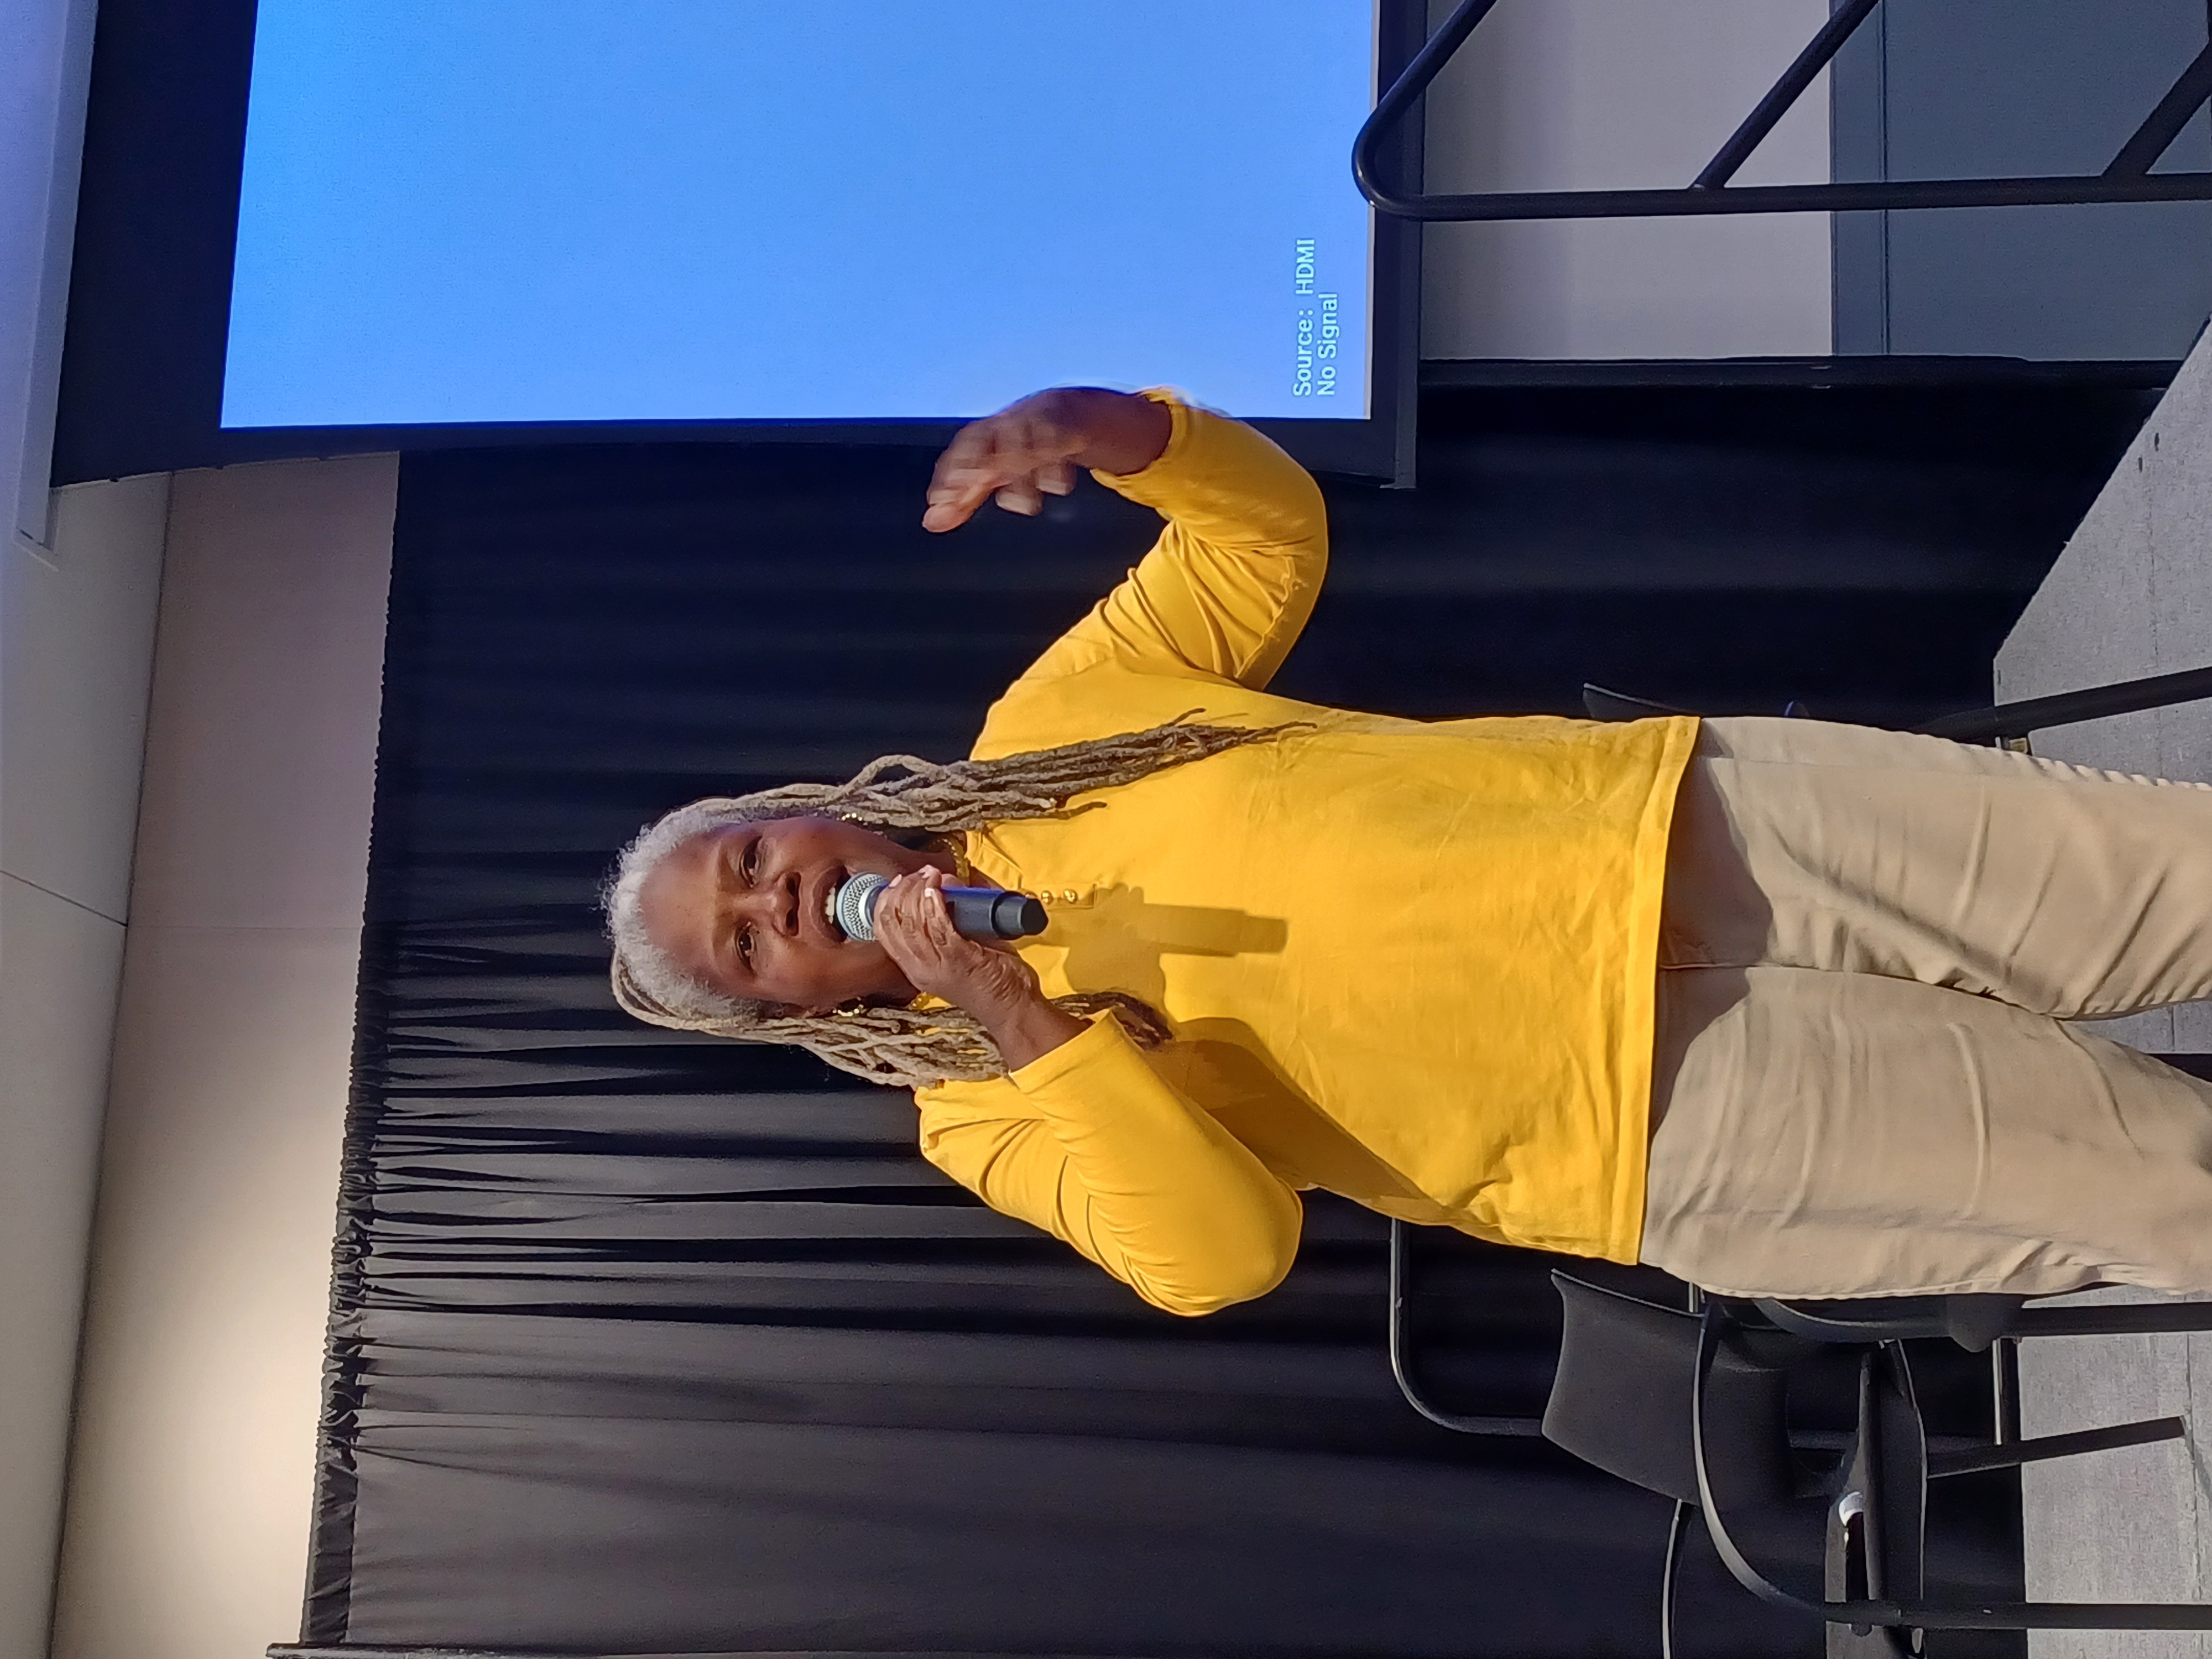 Washington, co-founding member of Black Urban Growers, speaking at the 10th Annual Black Urban Growers Conference, in Atlanta, Georgia, October 15, 2022